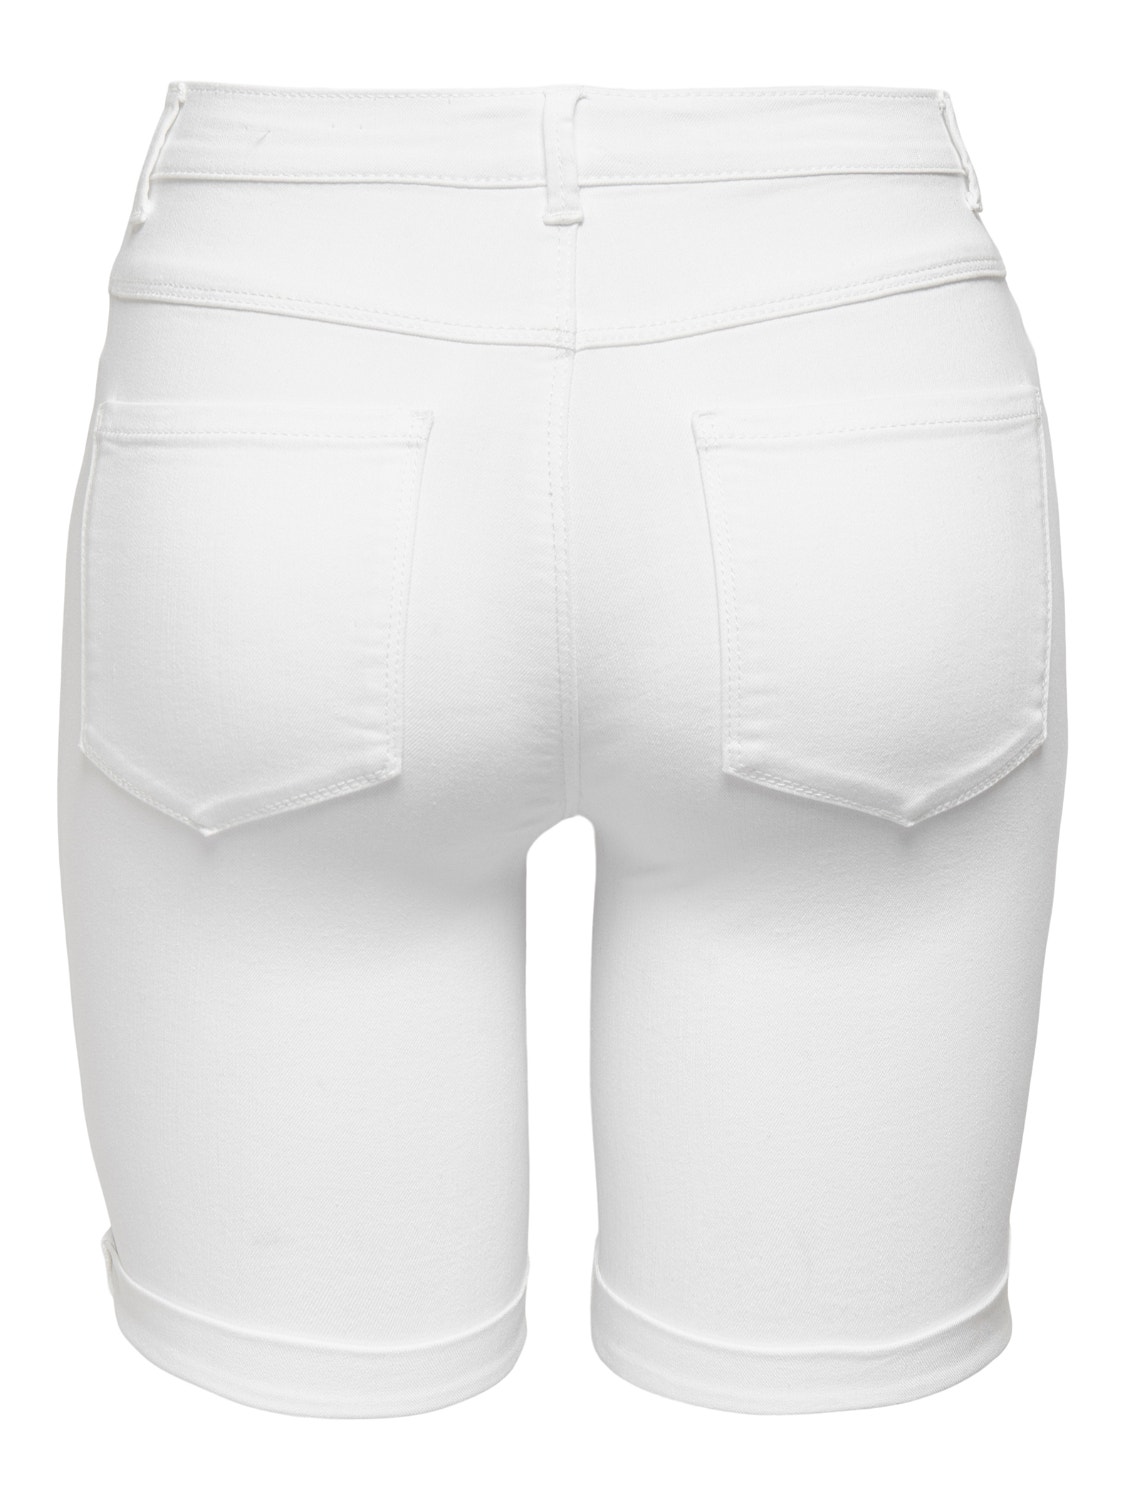 ONLY Shorts Bodycon Fit Taille moyenne Ourlets repliés -White - 15176847